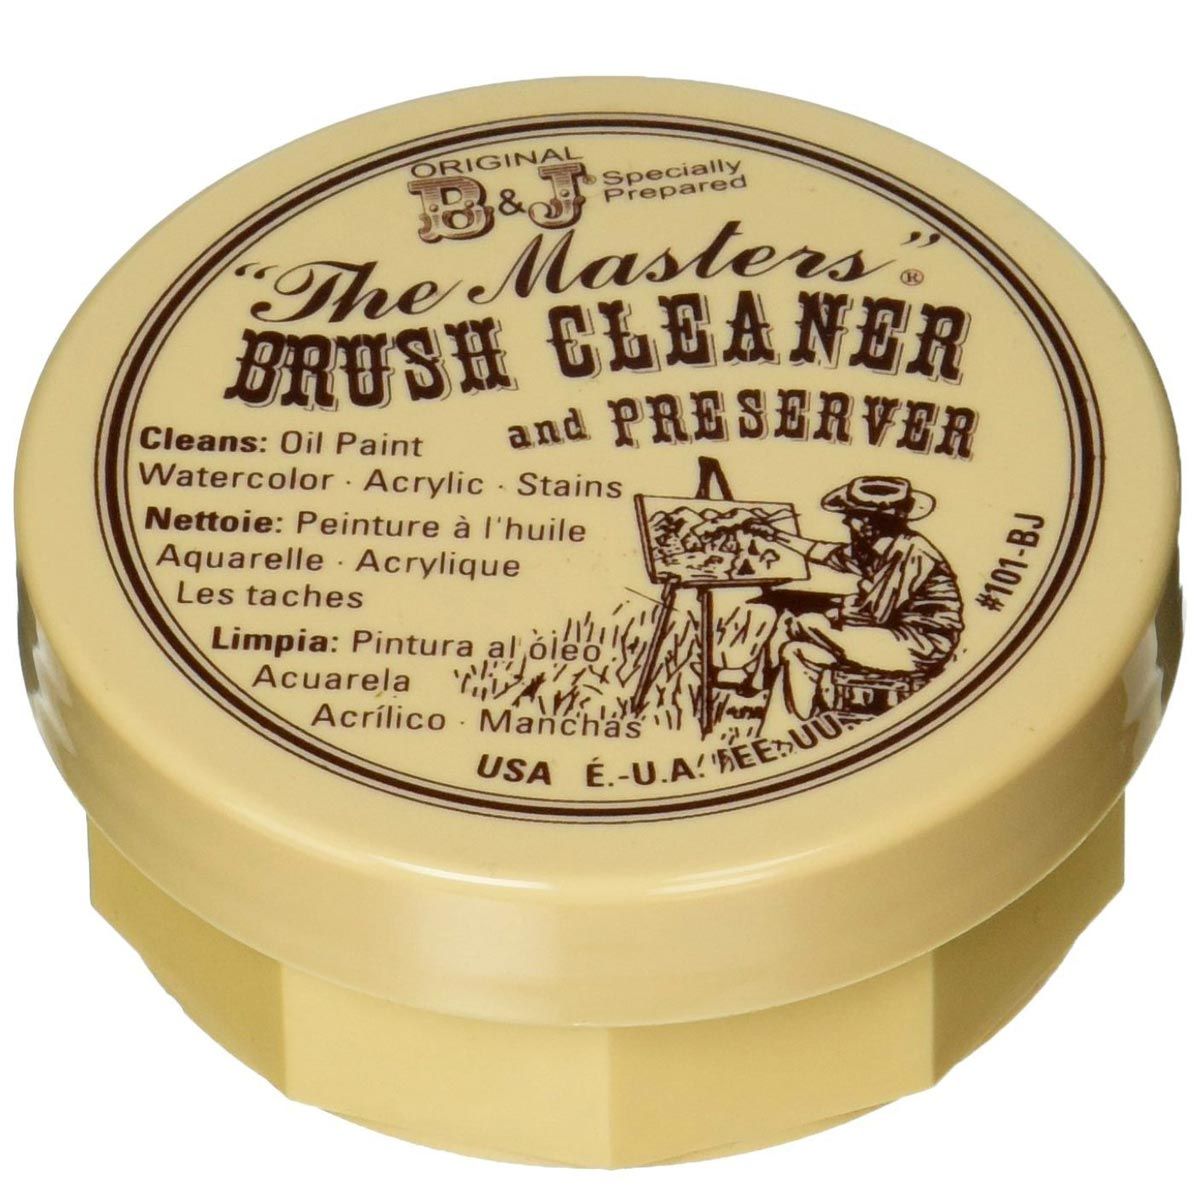 General's The Masters Brush Cleaner and Preserver Card 2.5 oz